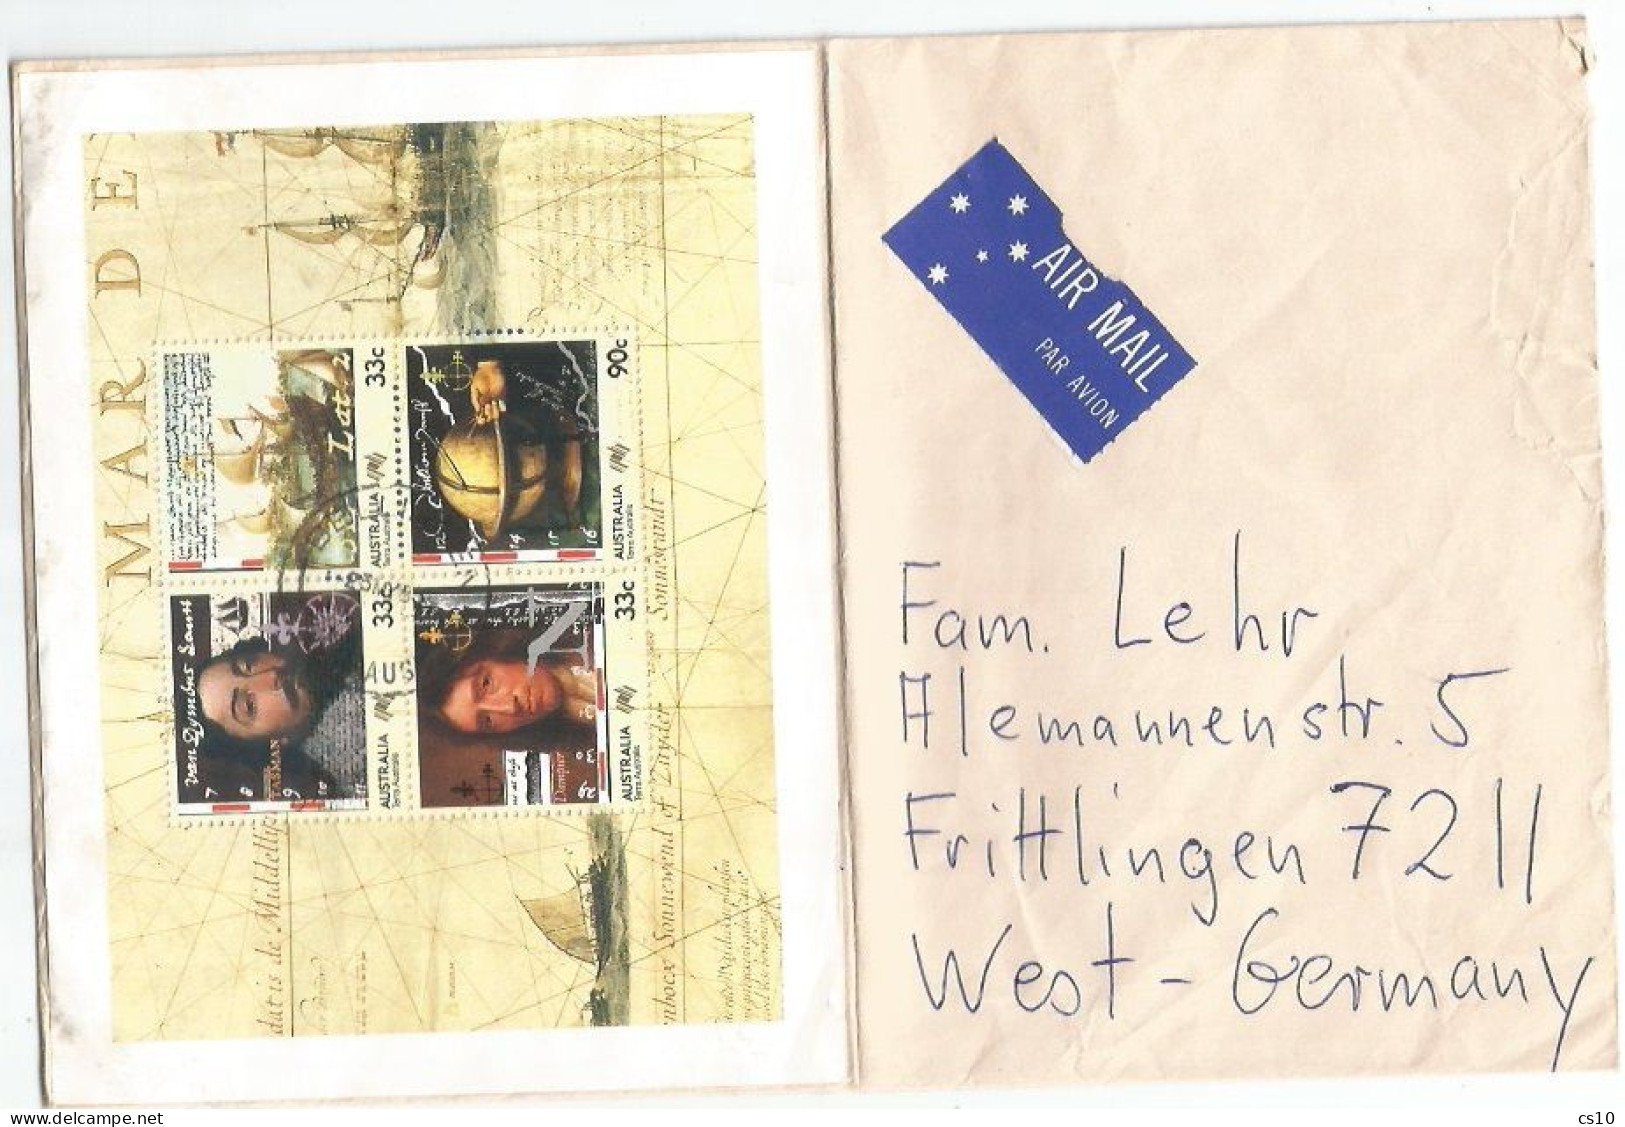 Australia Souvenir Sheet Terra Australis 1985 REALLY TRAVELLED On AirMailCV Bellingen 23may1985 To Germany - Covers & Documents